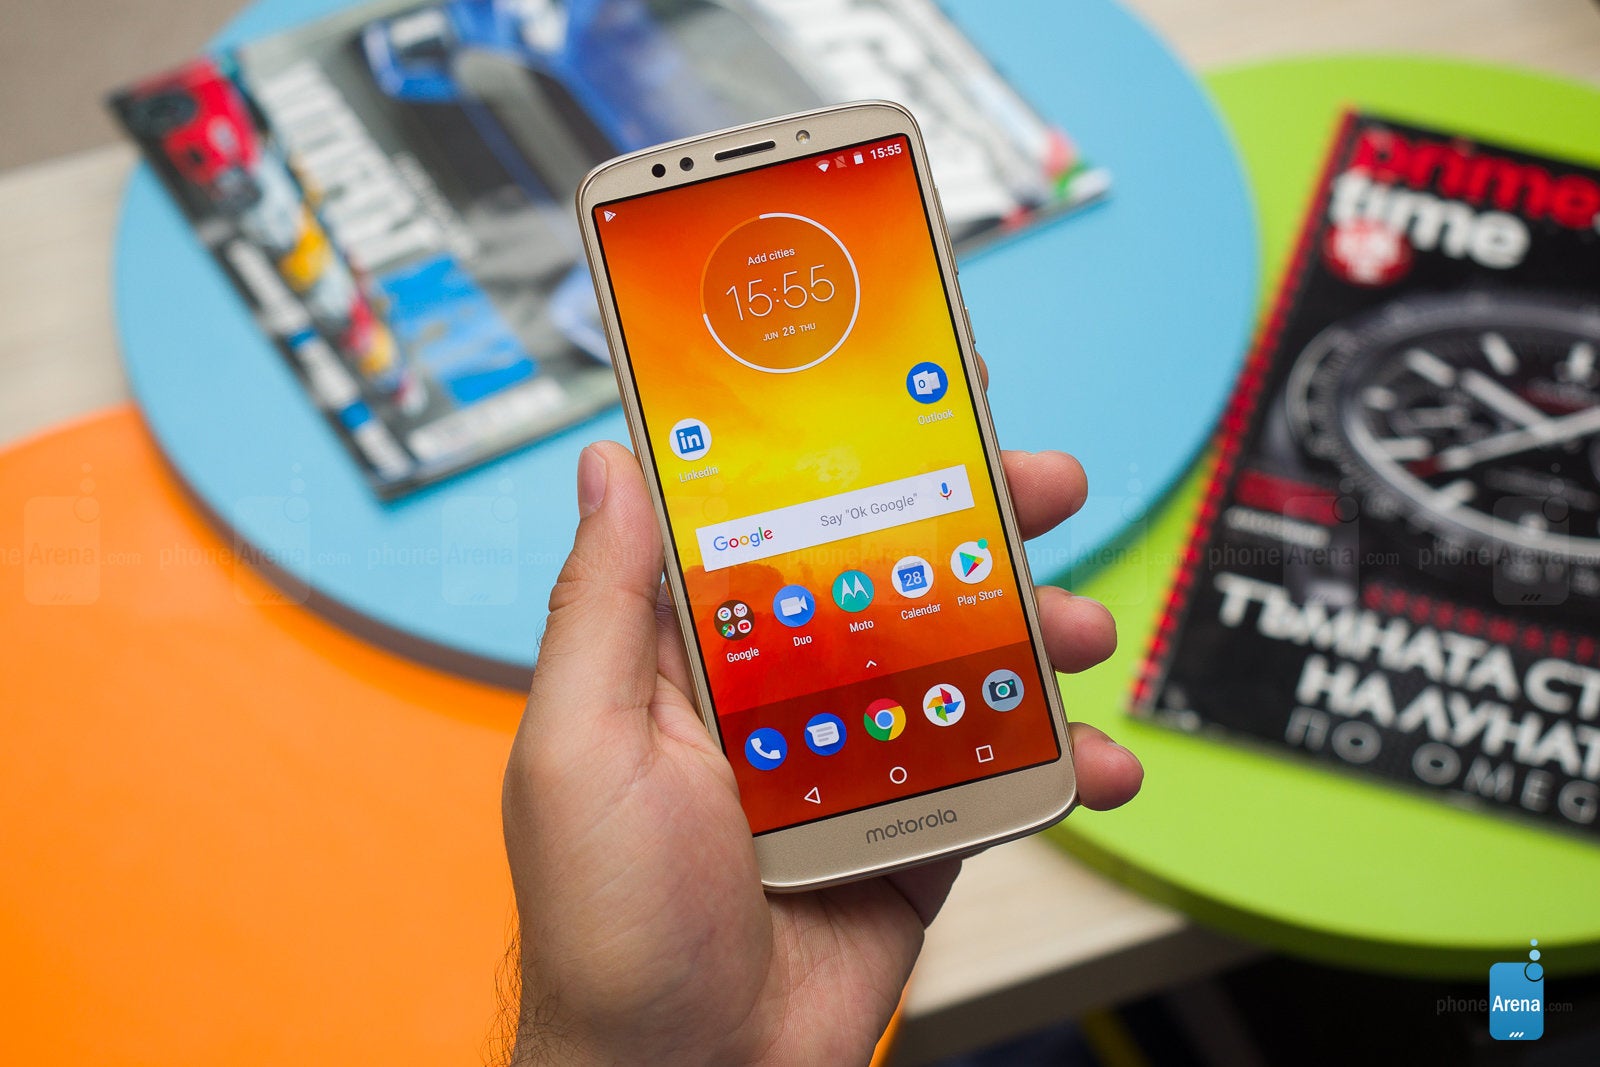 Moto E5 hands-on: big battery and clean Android on the cheap